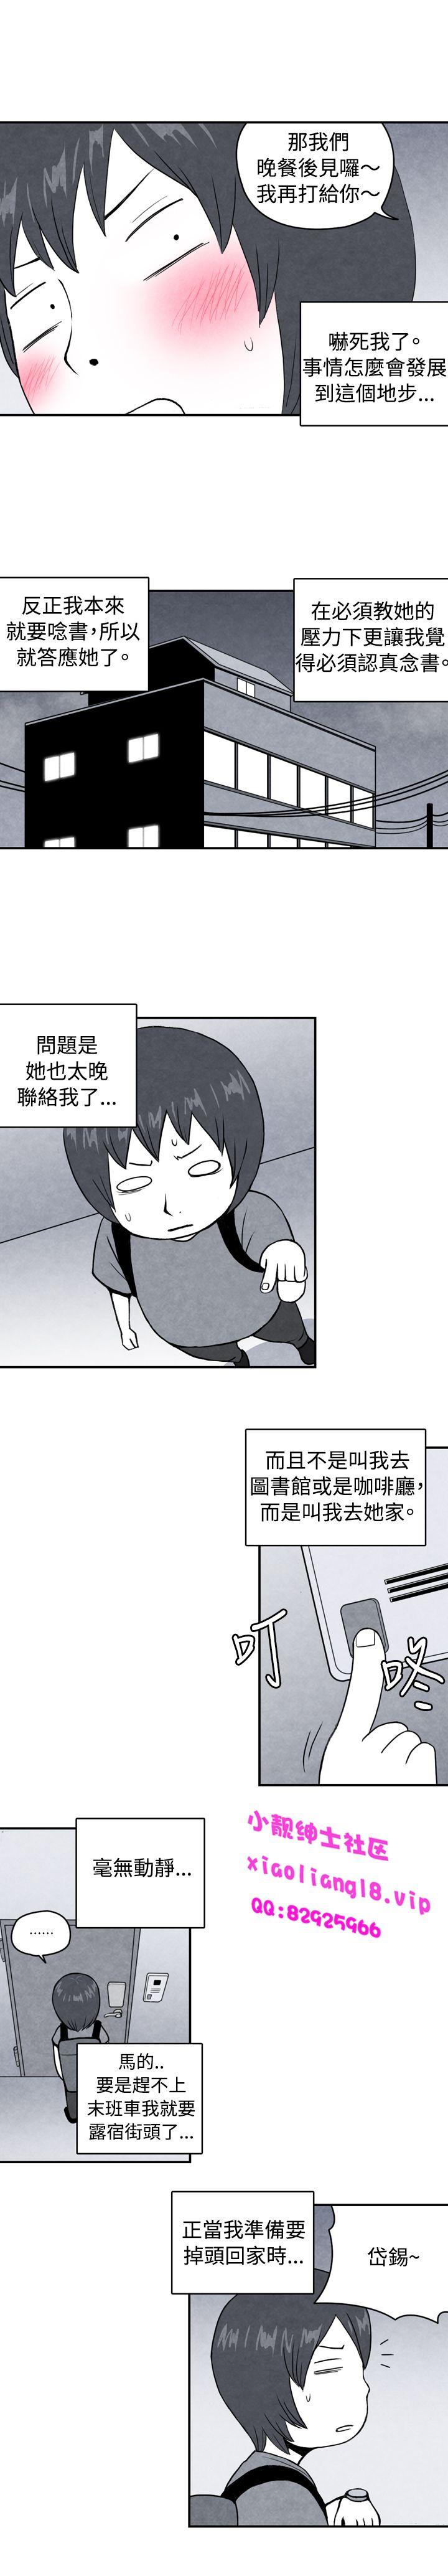 Ginger 中文韩漫 生物學的女性攻略法 Ch.0-5 And - Page 4